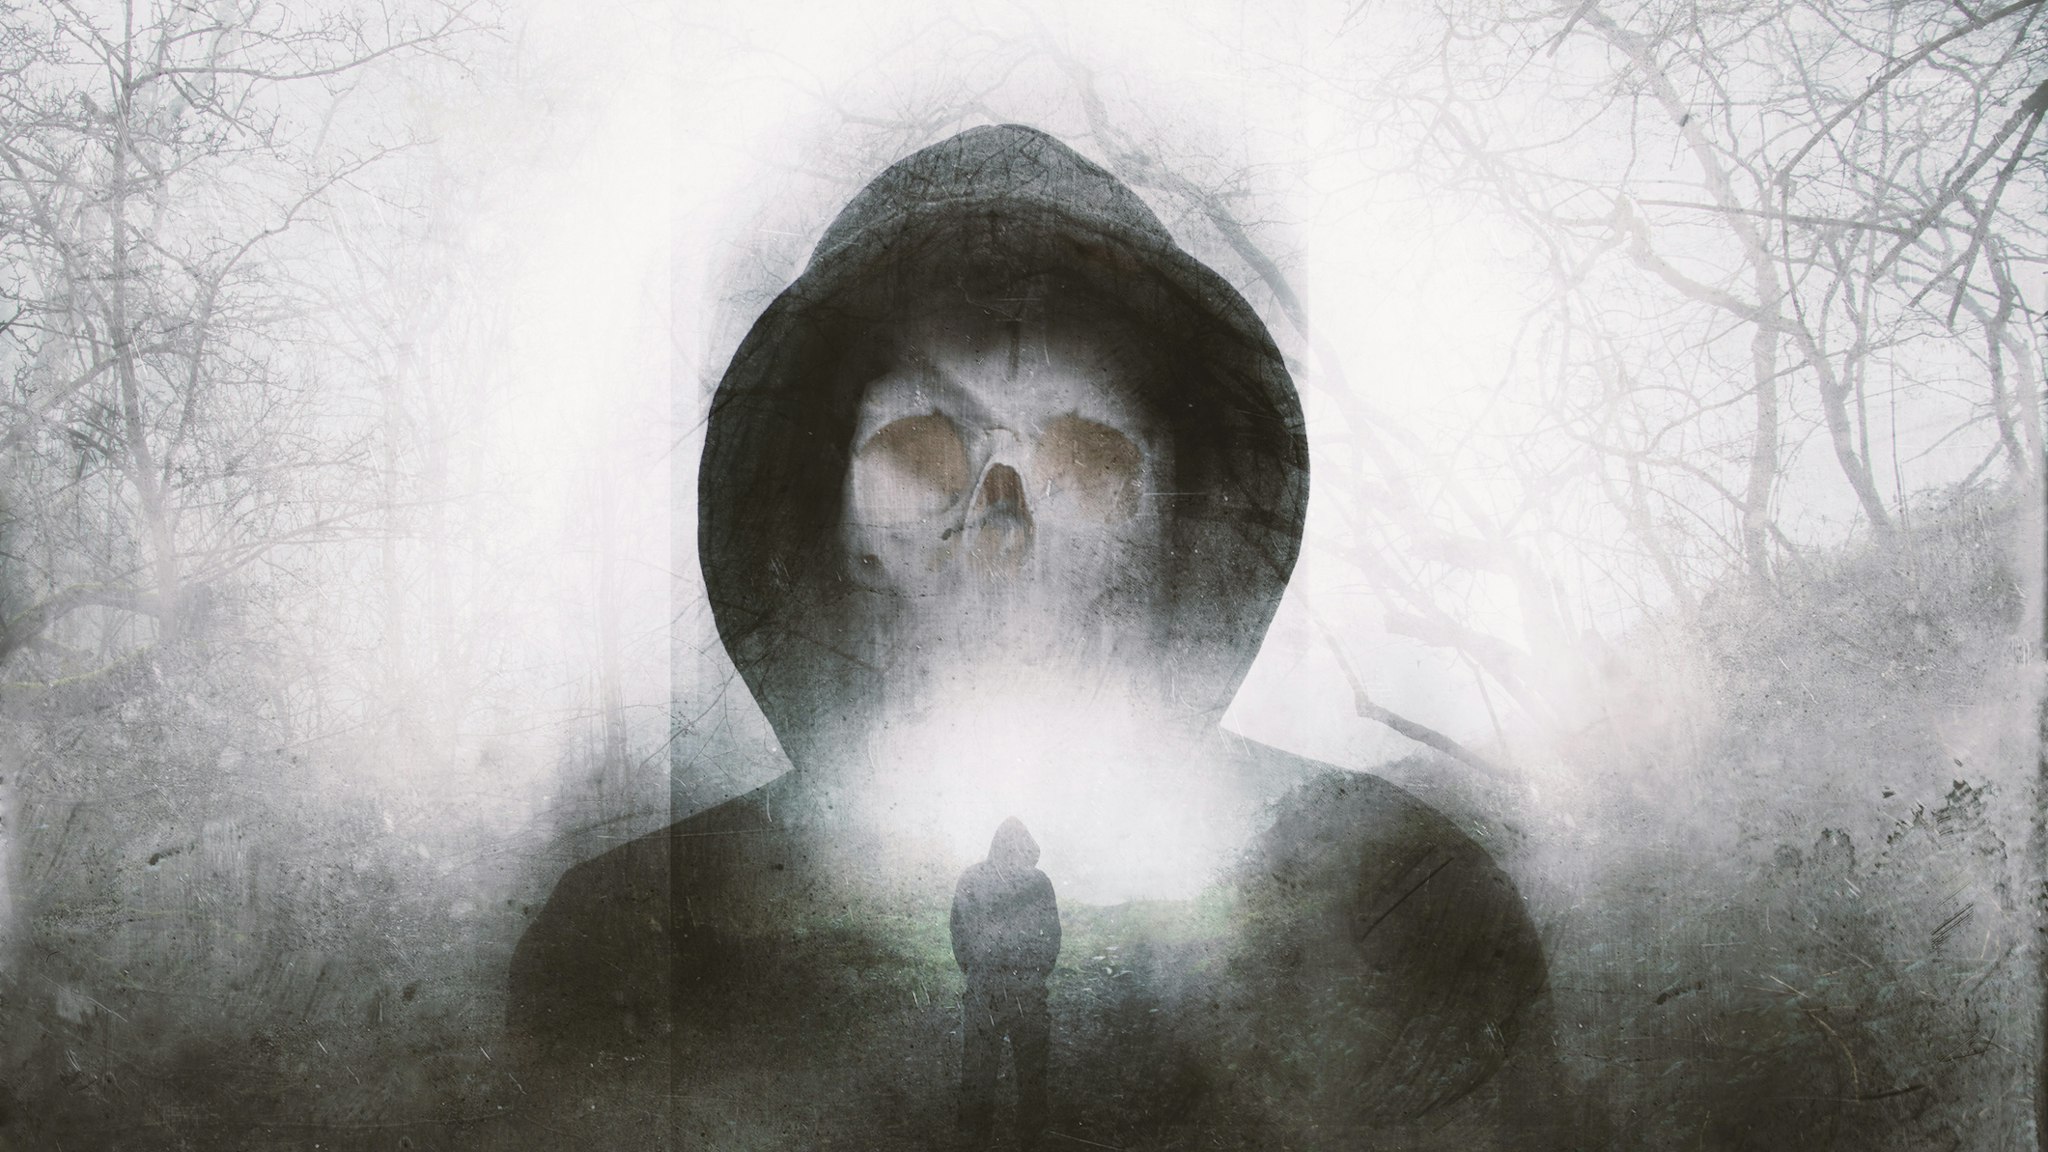 A double exposure of a scary hooded figure with a skull for a face. Over layered with a forest in winter. with a blurred, grunge, abstract edit - stock photo